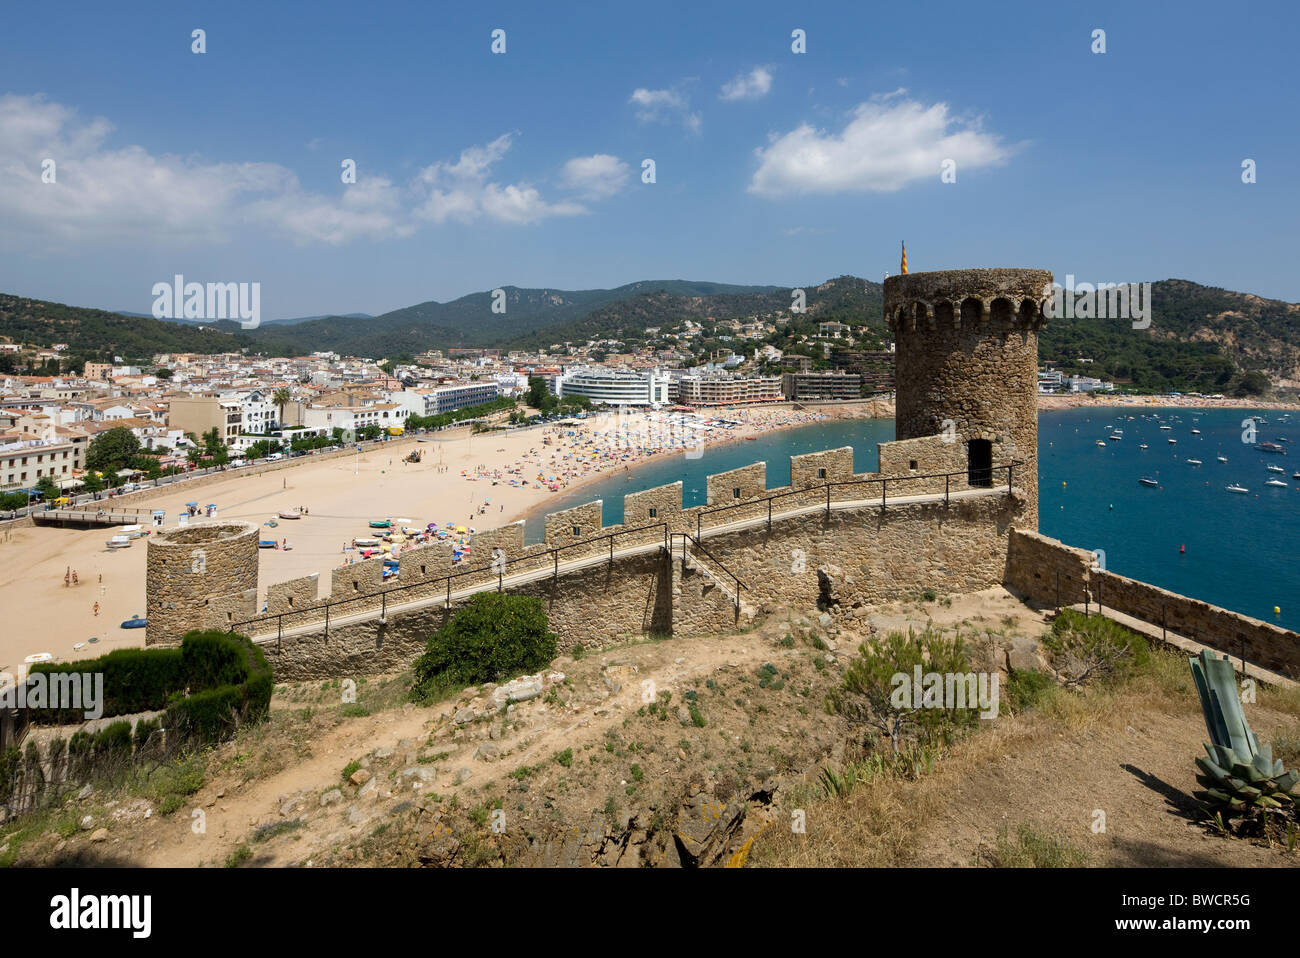 View of Tossa de Mar showing the medieval fortified and turreted walls. Stock Photo